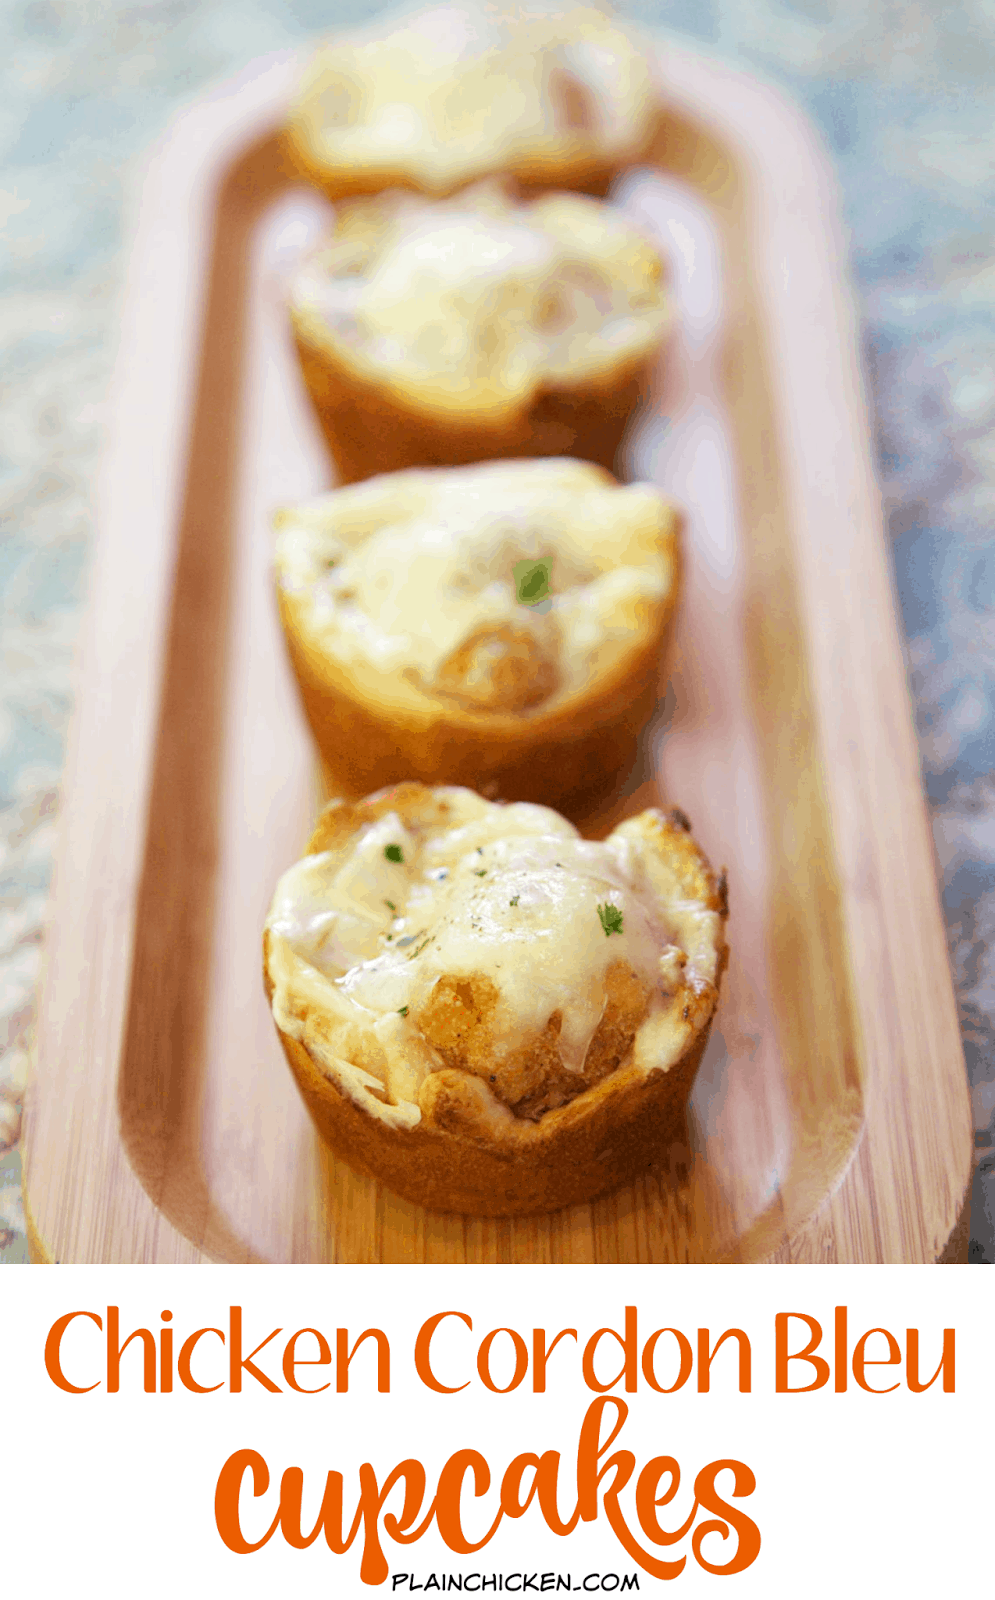 Chicken Cordon Bleu Cupcakes - frozen popcorn chicken, ham, alfredo sauce, swiss cheese baked in crescent cups! Only 5 ingredients and ready in under 20 minutes! These are great for a quick lunch, dinner or even a party! We love these!! Kids (and adults) gobble these up!